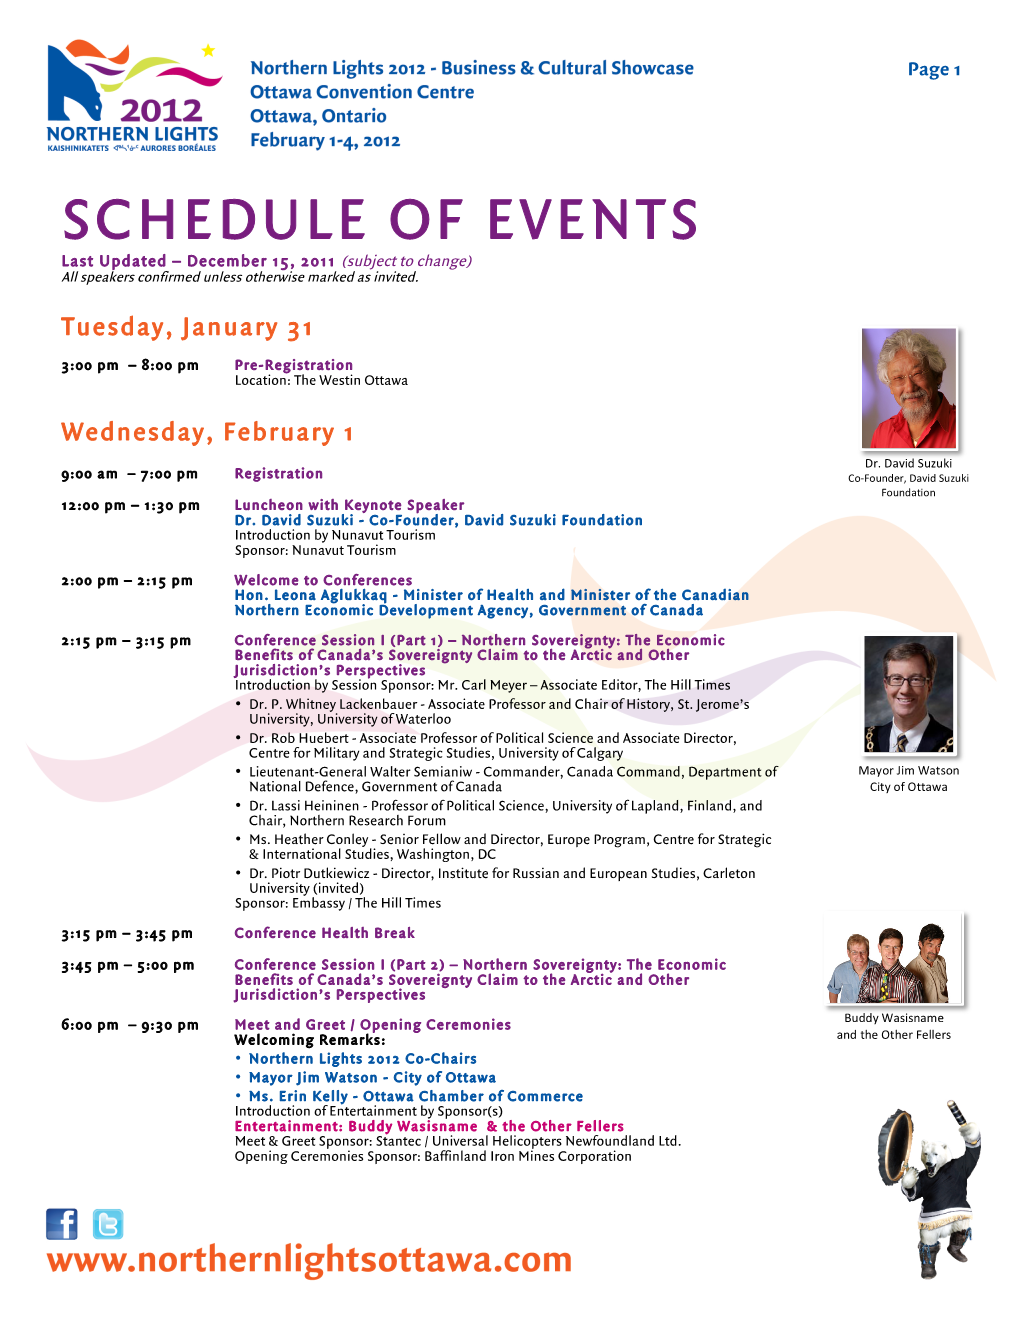 SCHEDULE of EVENTS Last Updated – December 15, 2011 (Subject to Change) All Speakers Confirmed Unless Otherwise Marked As Invited